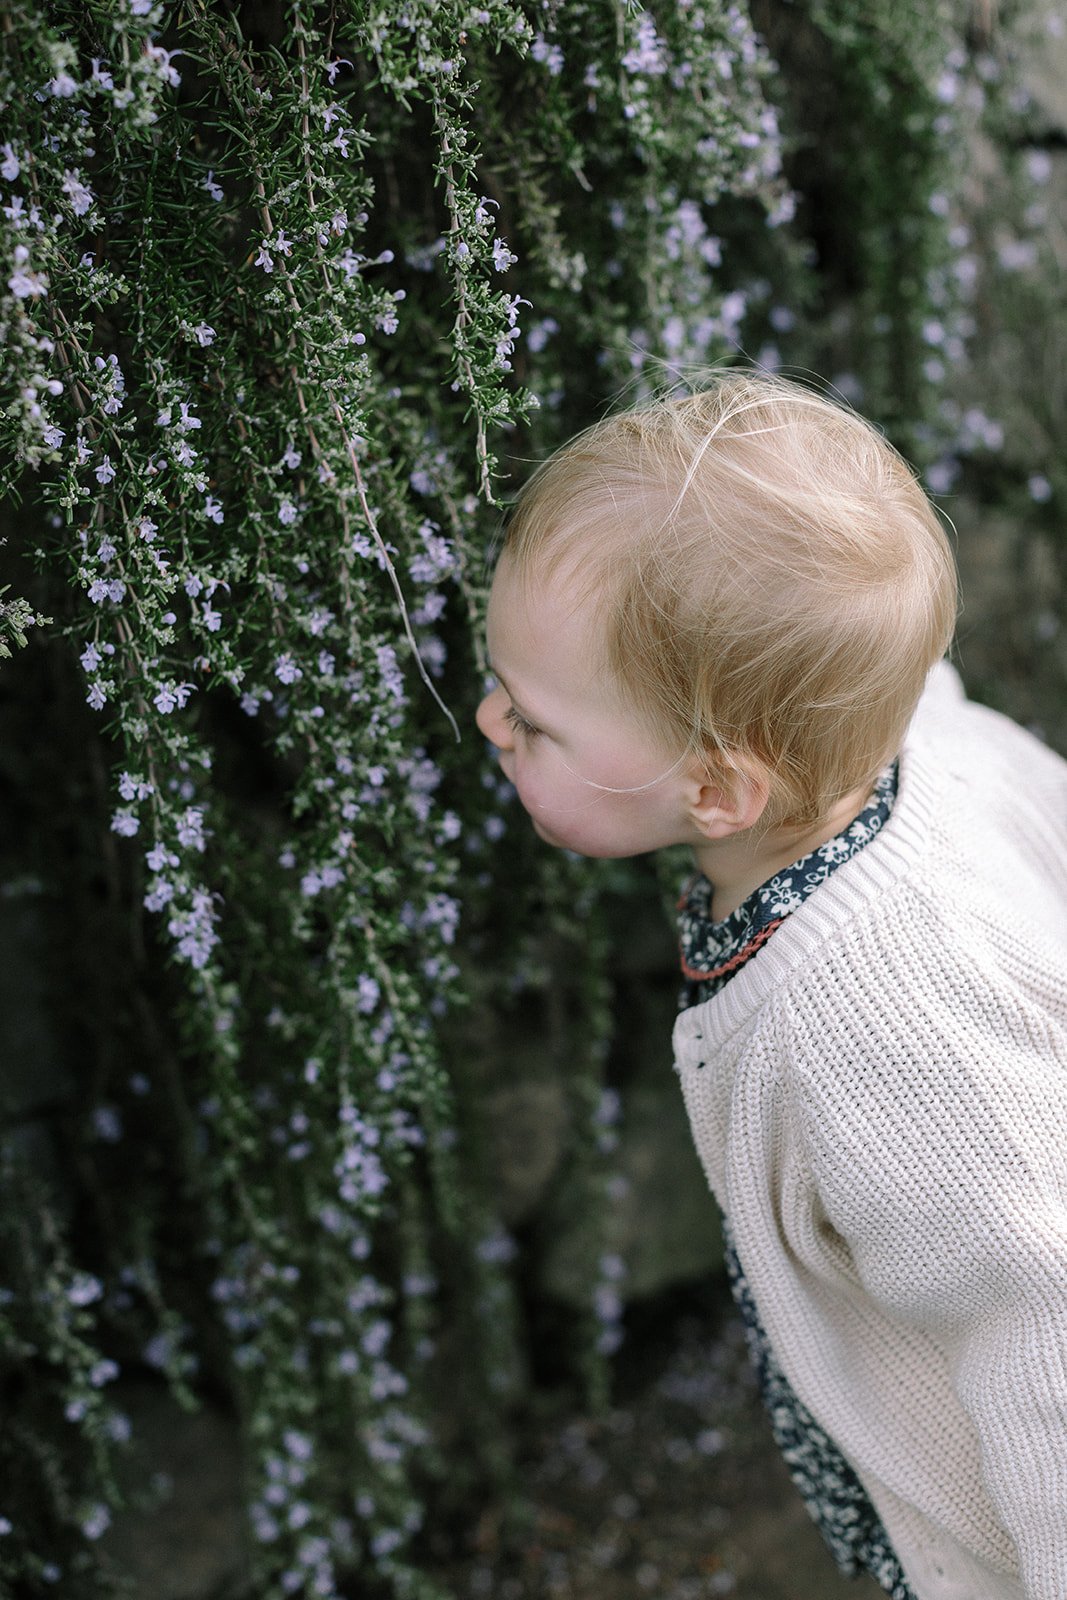  Family photographer captures toddler smelling flowers in richmond park London 